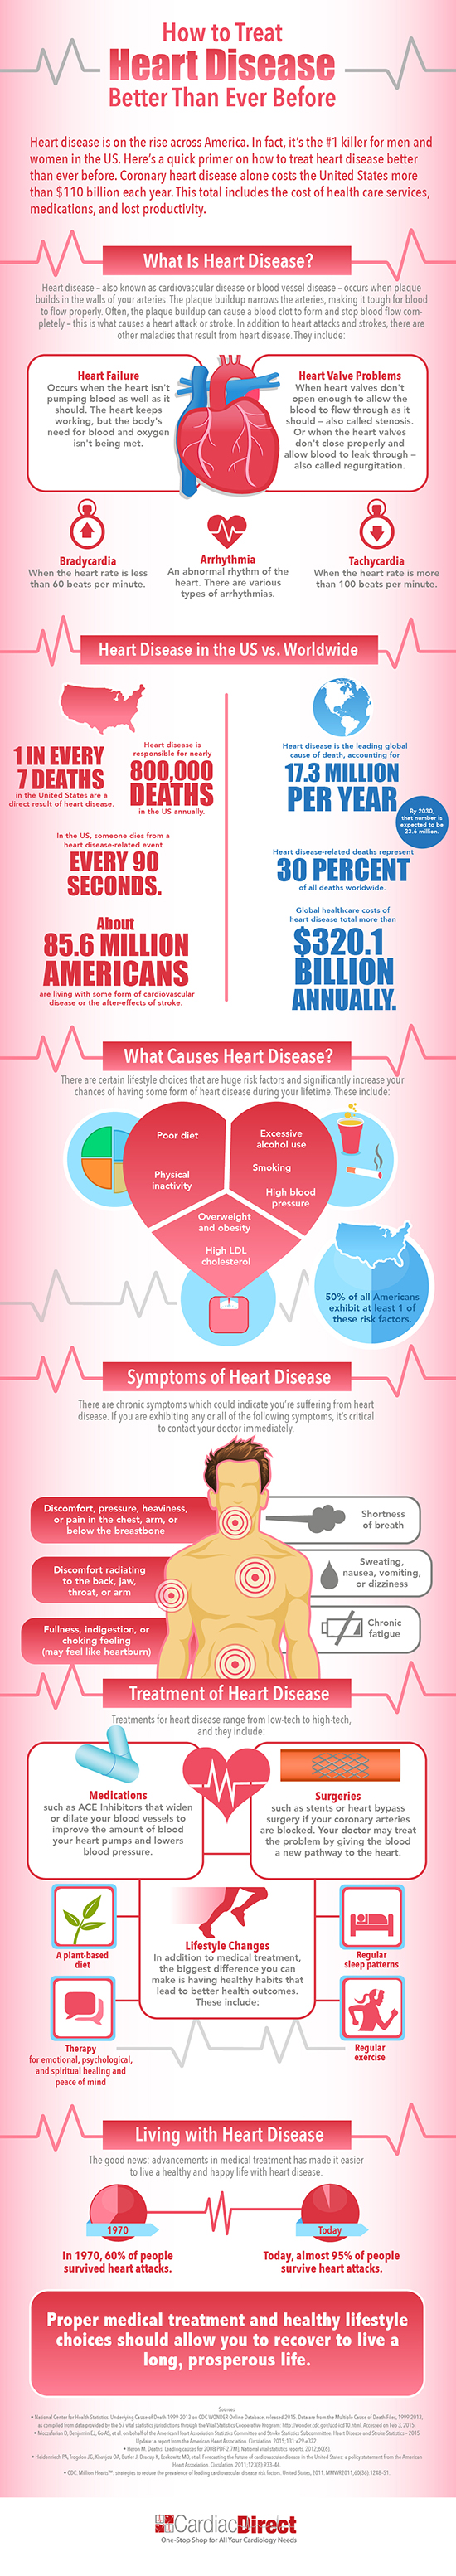 How to Treat Heart Disease Better than Ever Before | Visual.ly